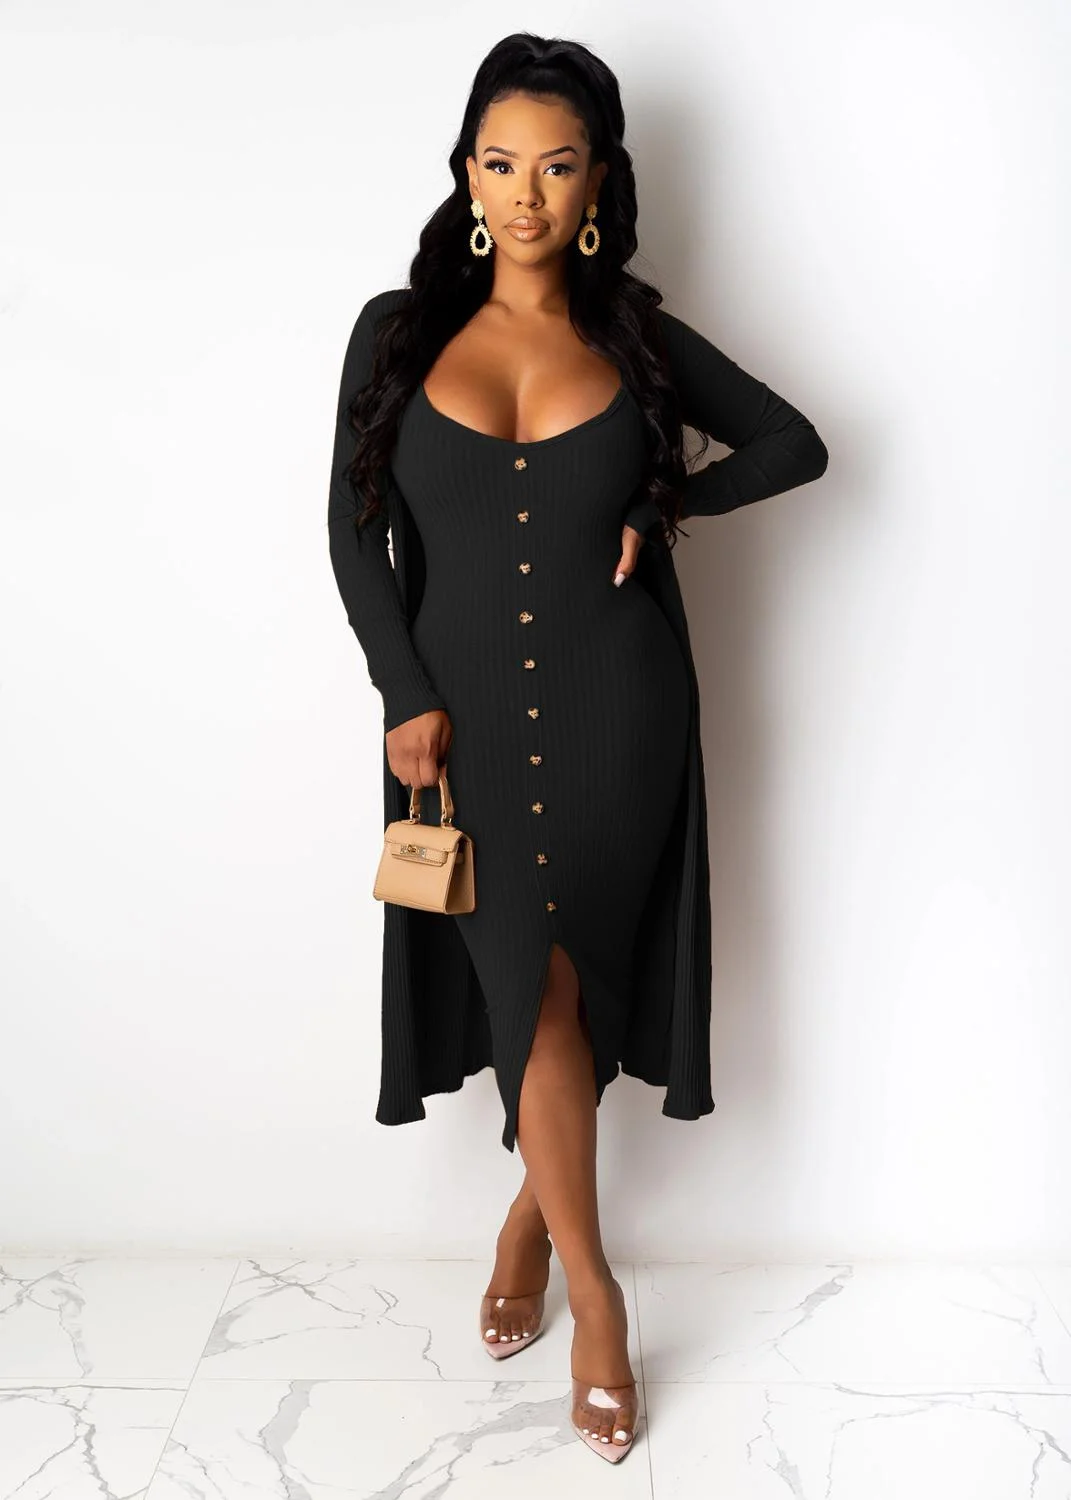 Women Knitted Vintage Long Sleeve Clock Tops Bodycon Midi Sleeveless Dress Suits 2 Two Piece Set Fitness Outfits Pants Sets